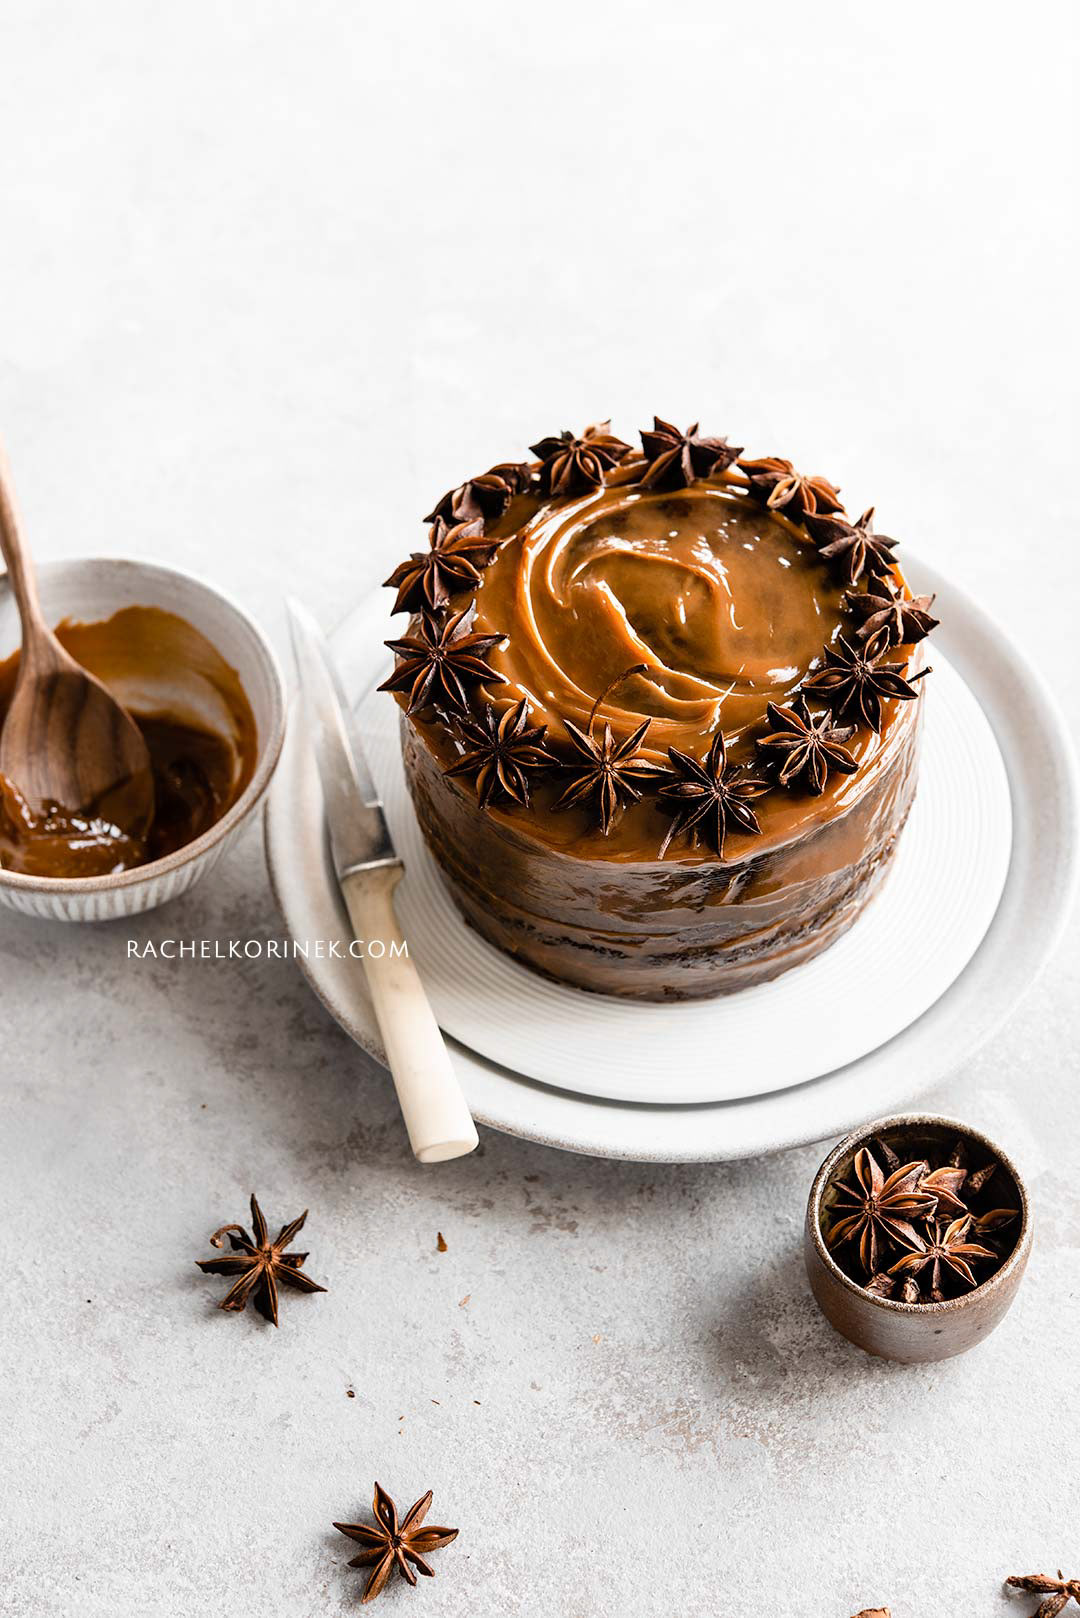 food photography food stylist Vancouver Photographer cake photography cake holiday photography winter food star anise caramel low key